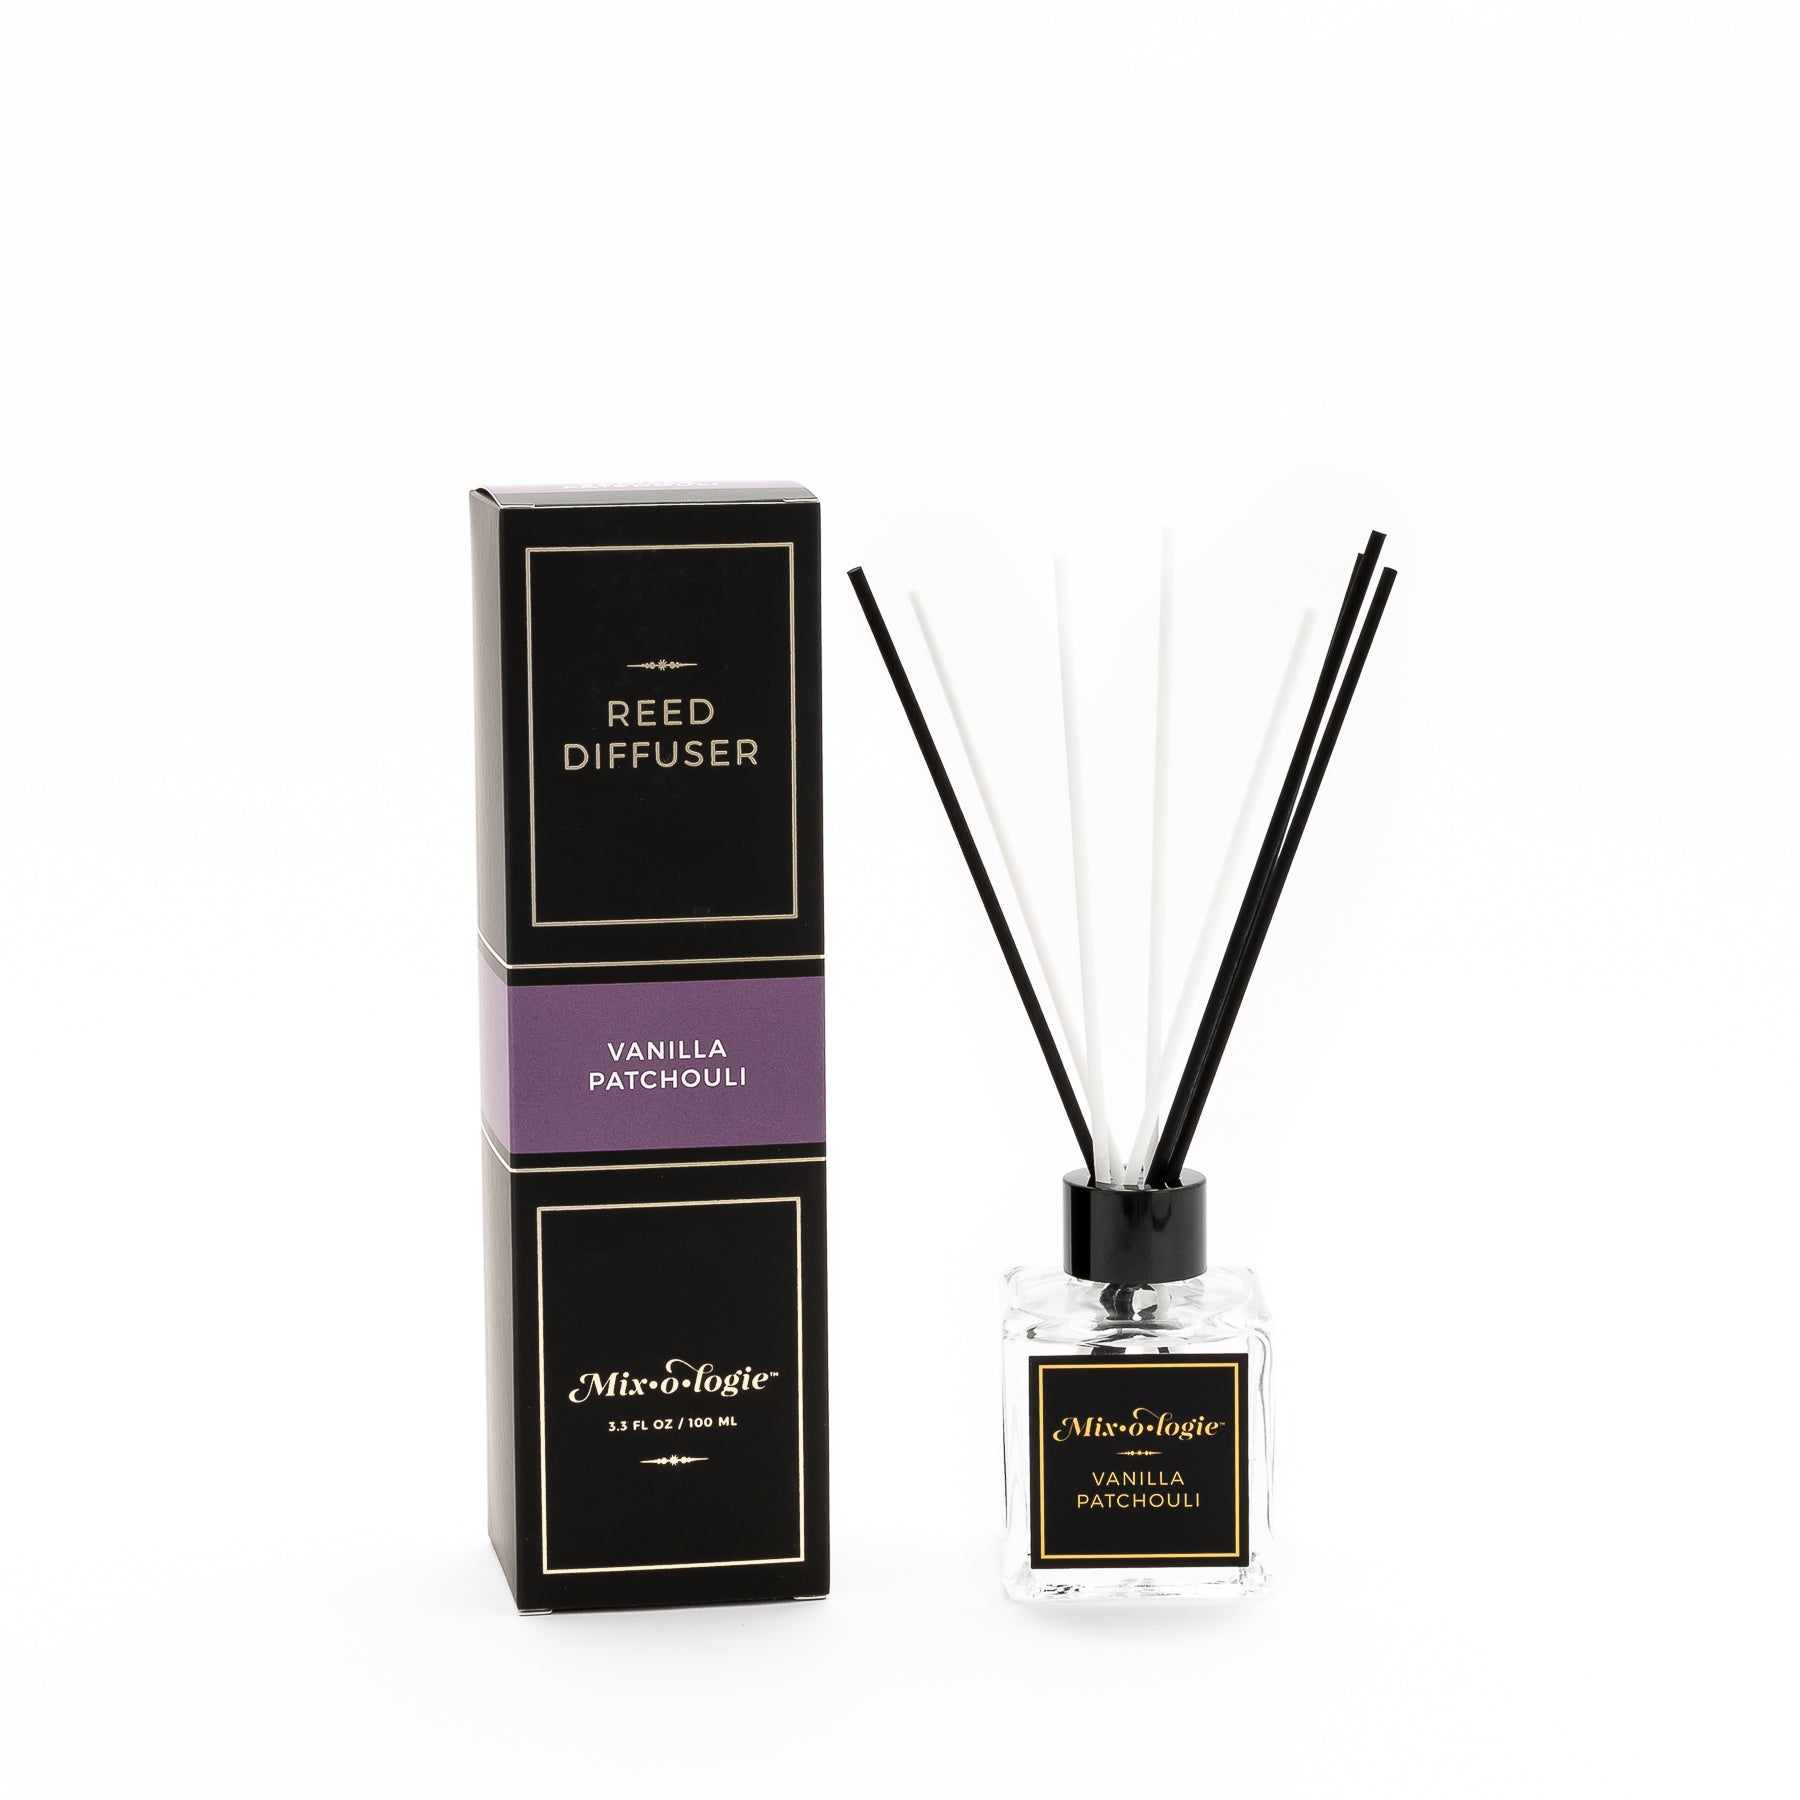 Vanilla Patchouli - Reed Diffuser - Tester